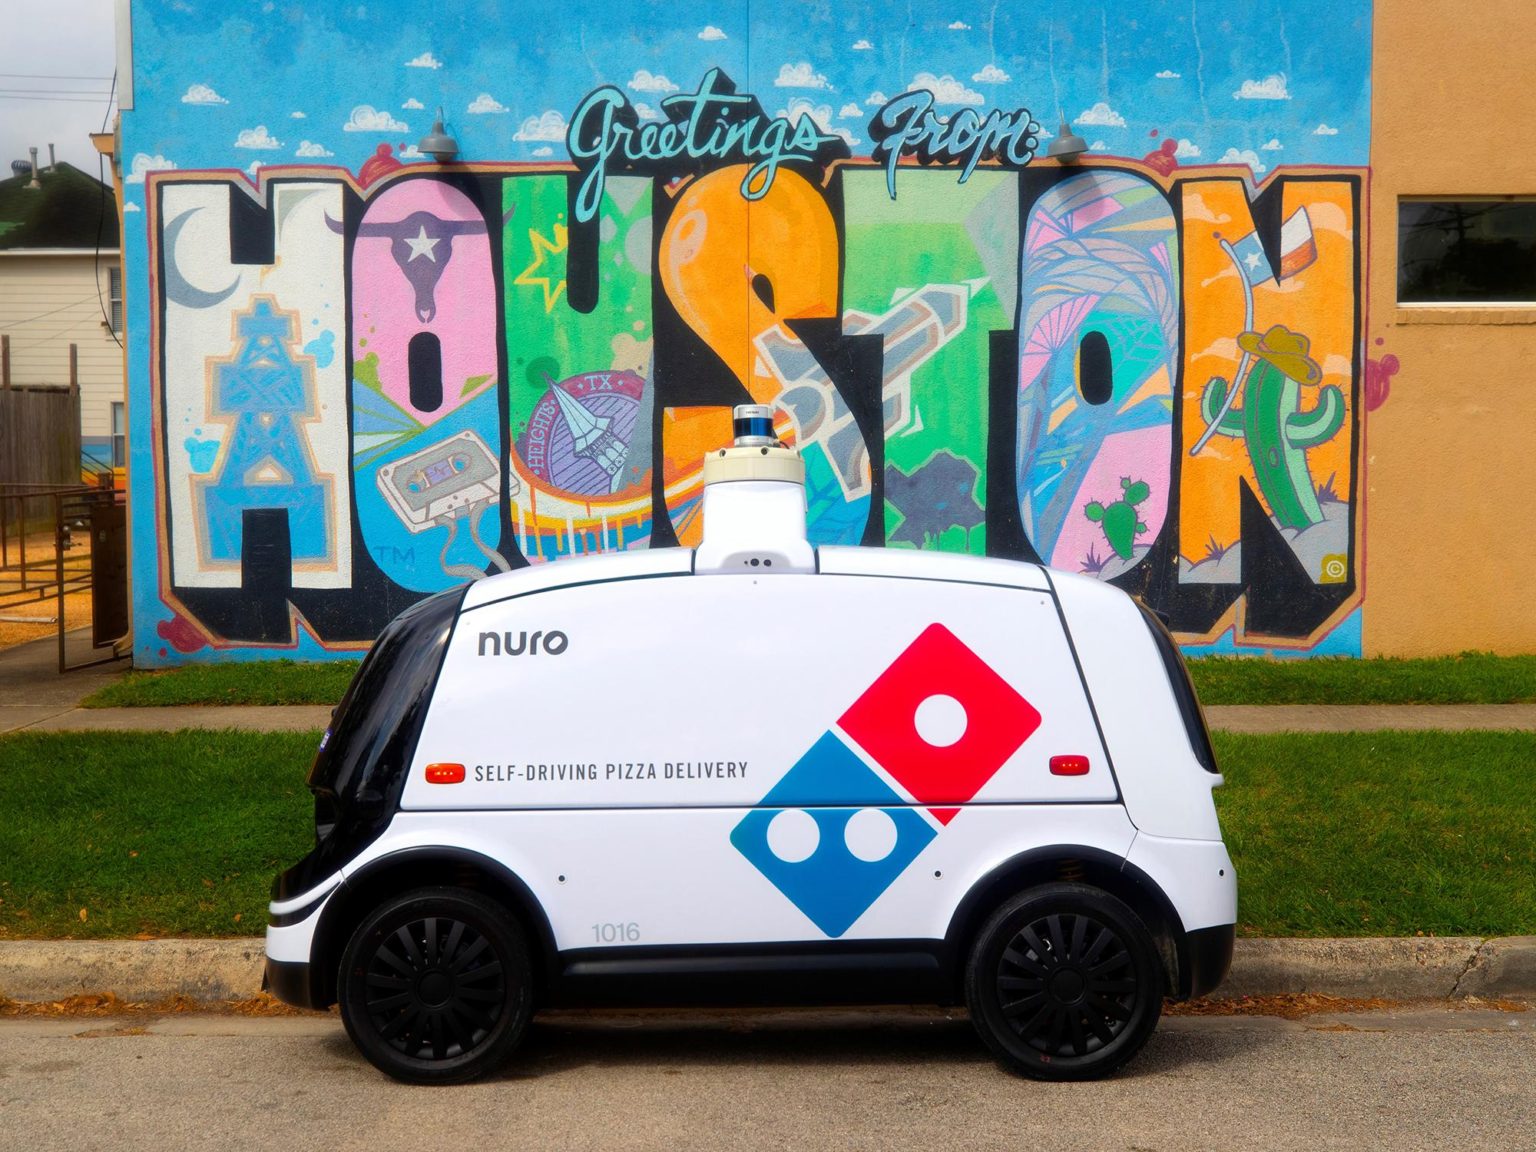 Domino's and Nuro announced their partnership in 2019 — and now the robots are hitting the roads.